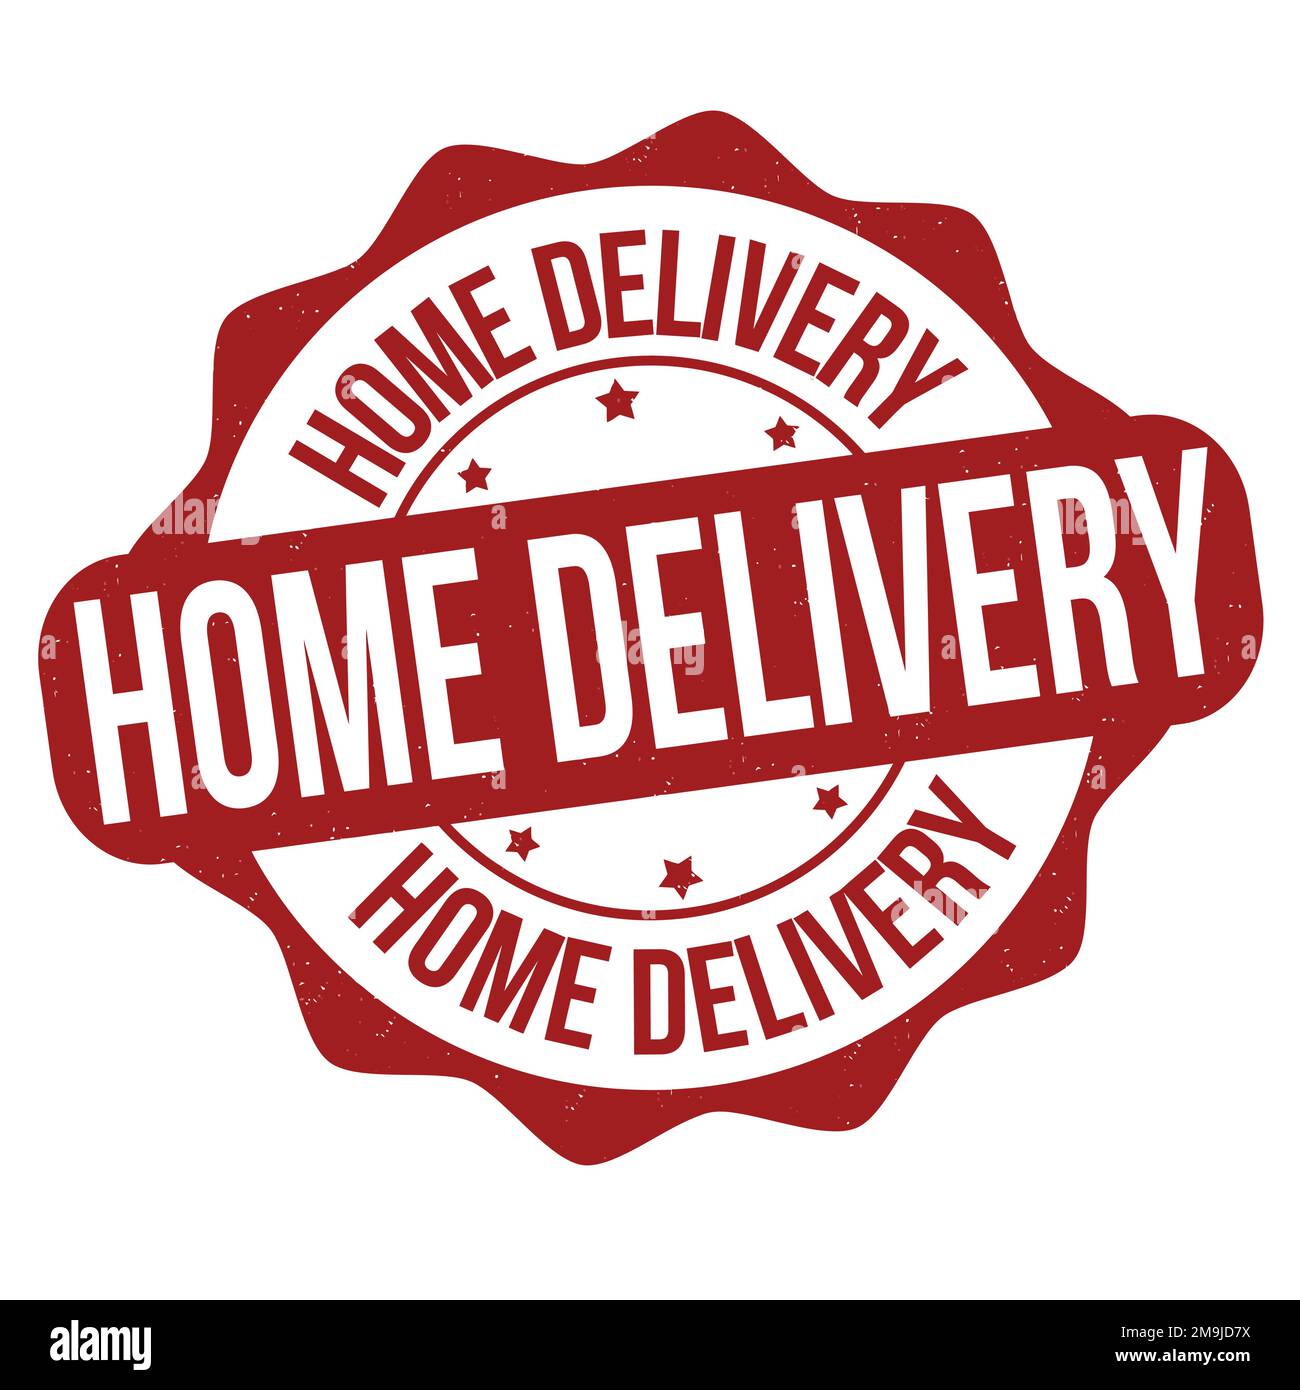 Home delivery label or stamp on white background, vector illustration ...